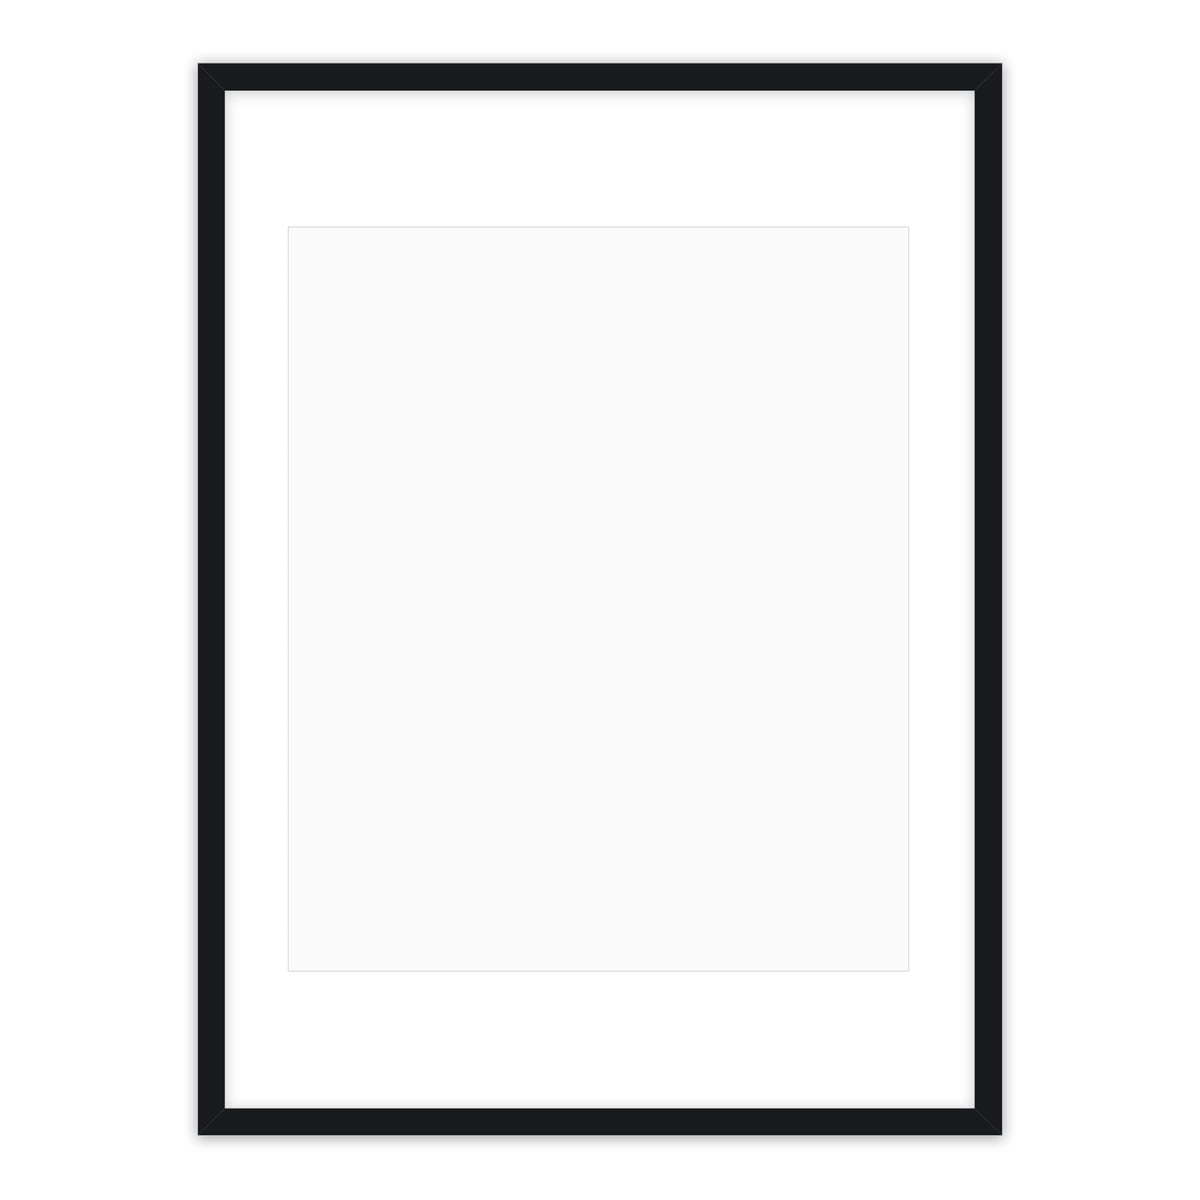 DELUXE35 Picture Frame 91x36 cm or 36x91 cm Photo/Gallery/Poster Frame 